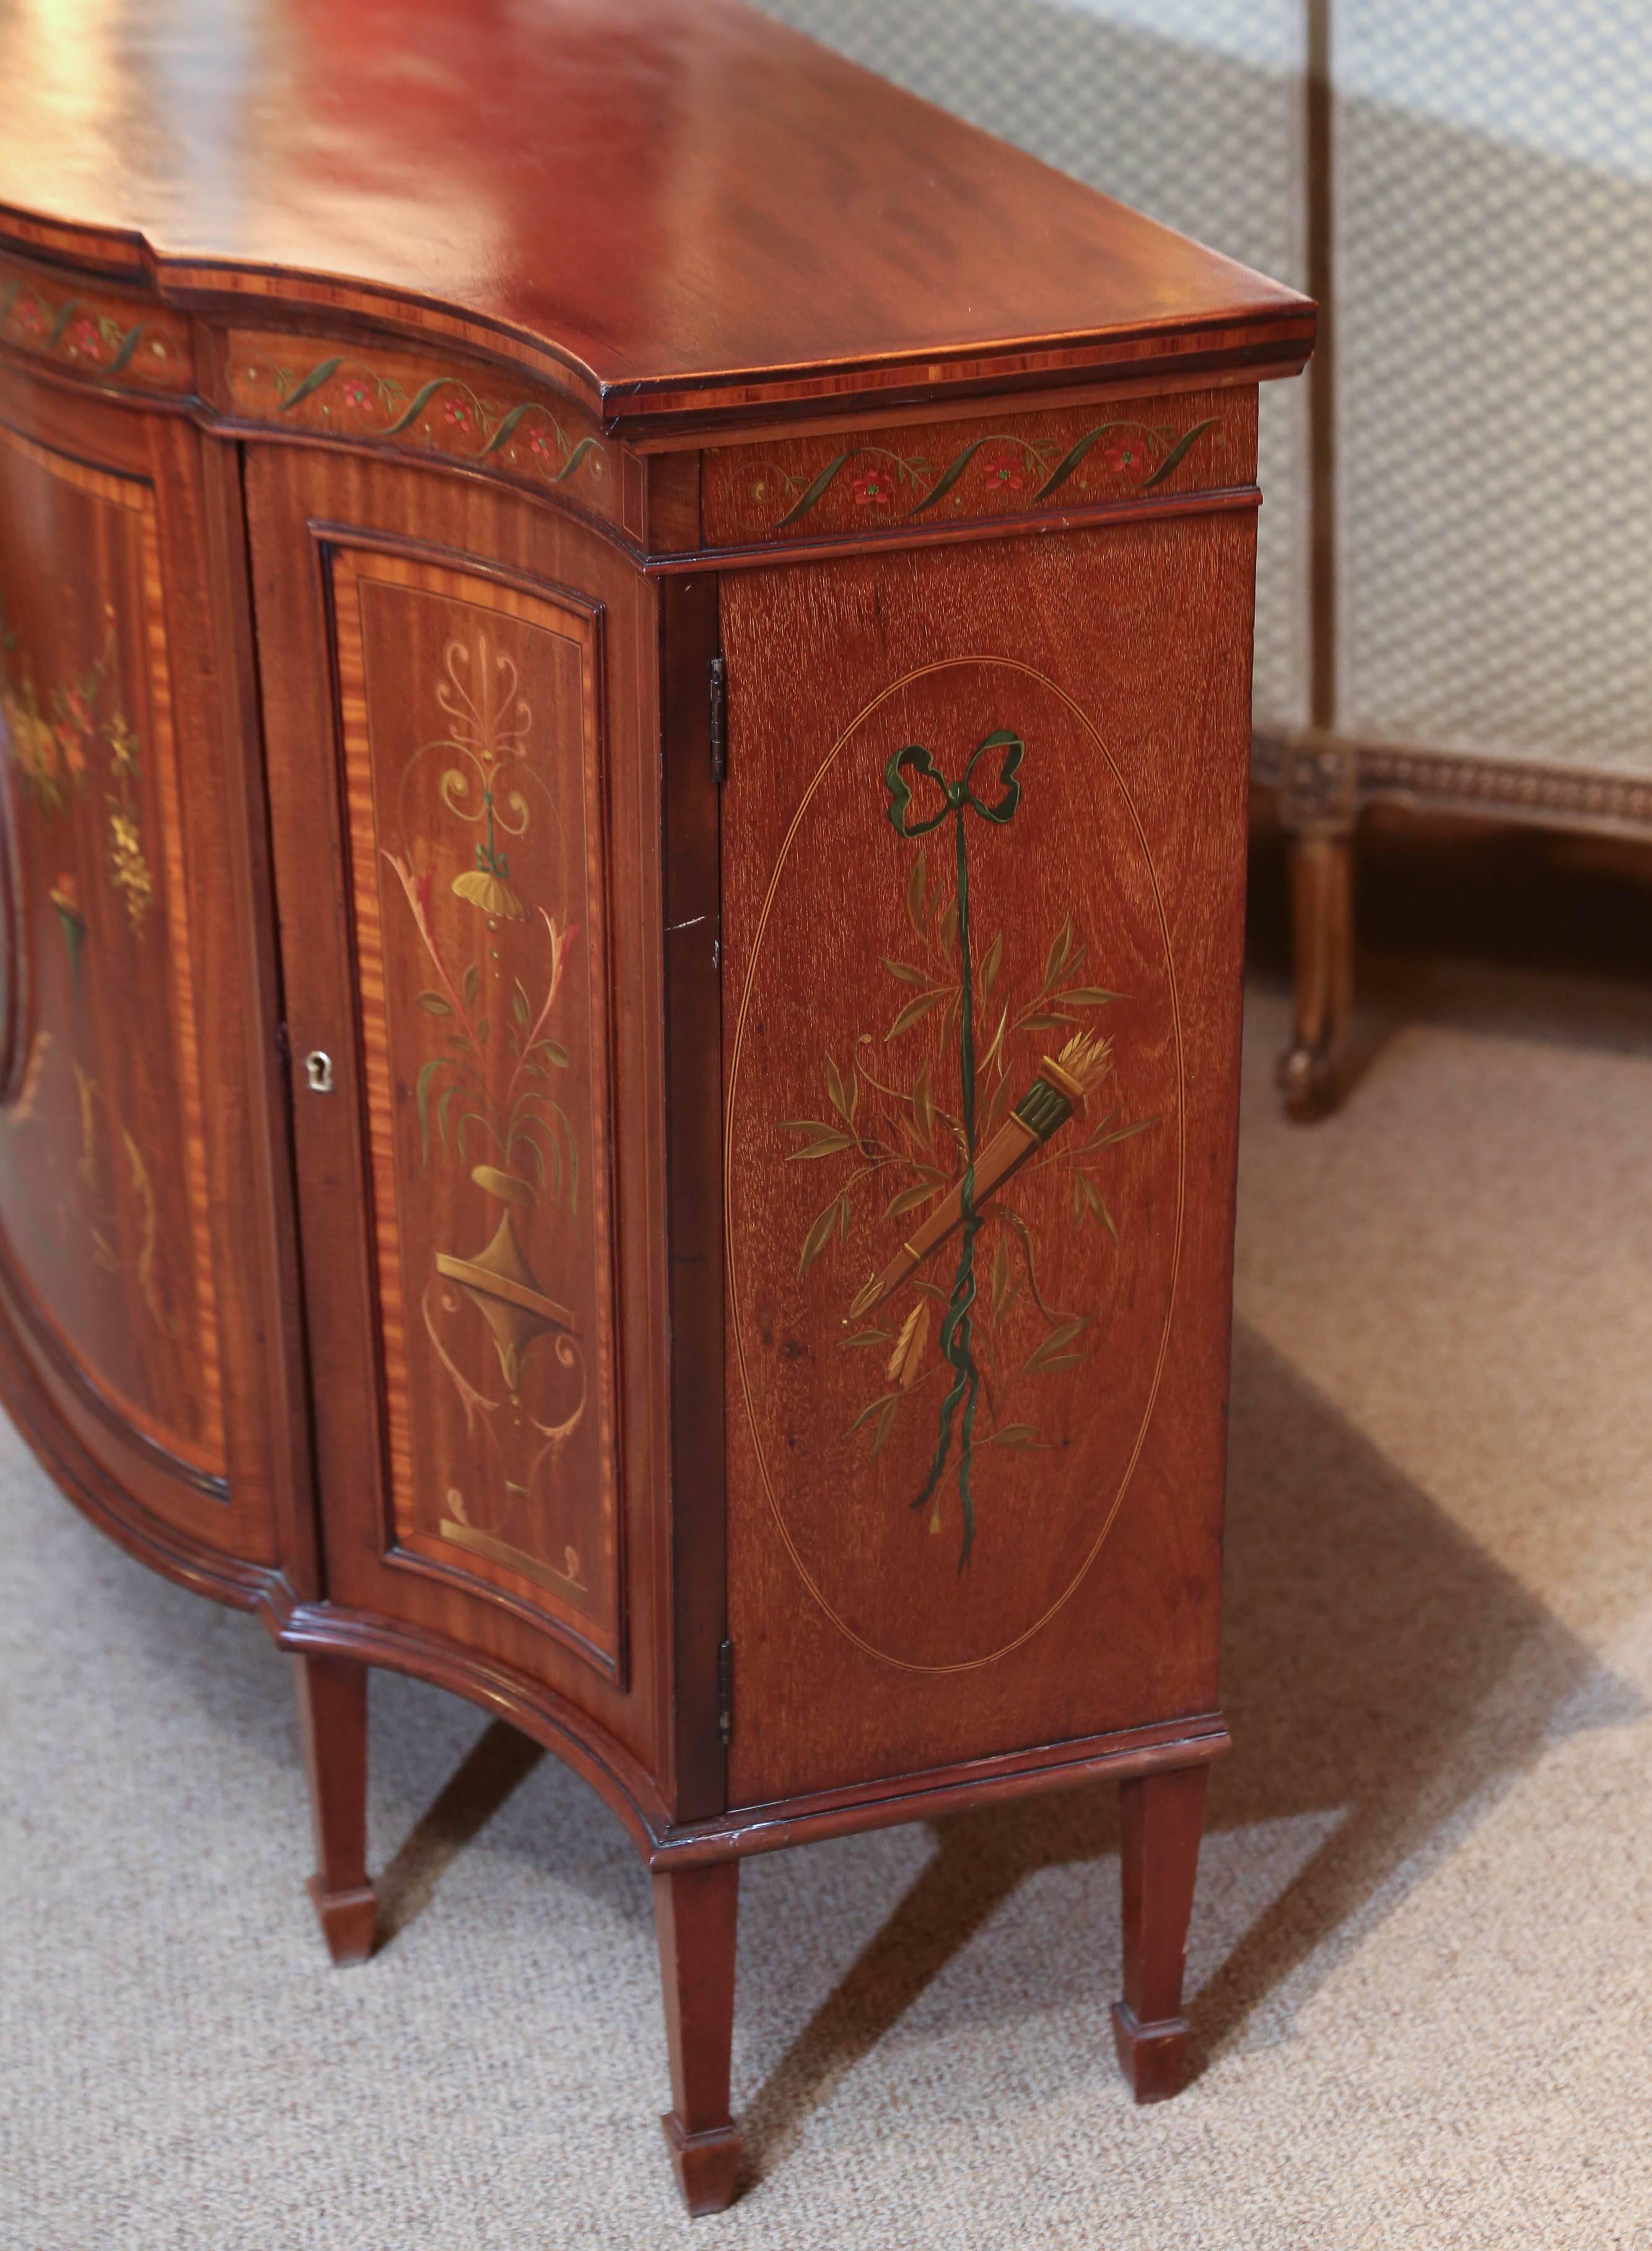 Walnut Adams Style Mahogany Cabinet, Hand-Painted with a Muse and Floral Motif